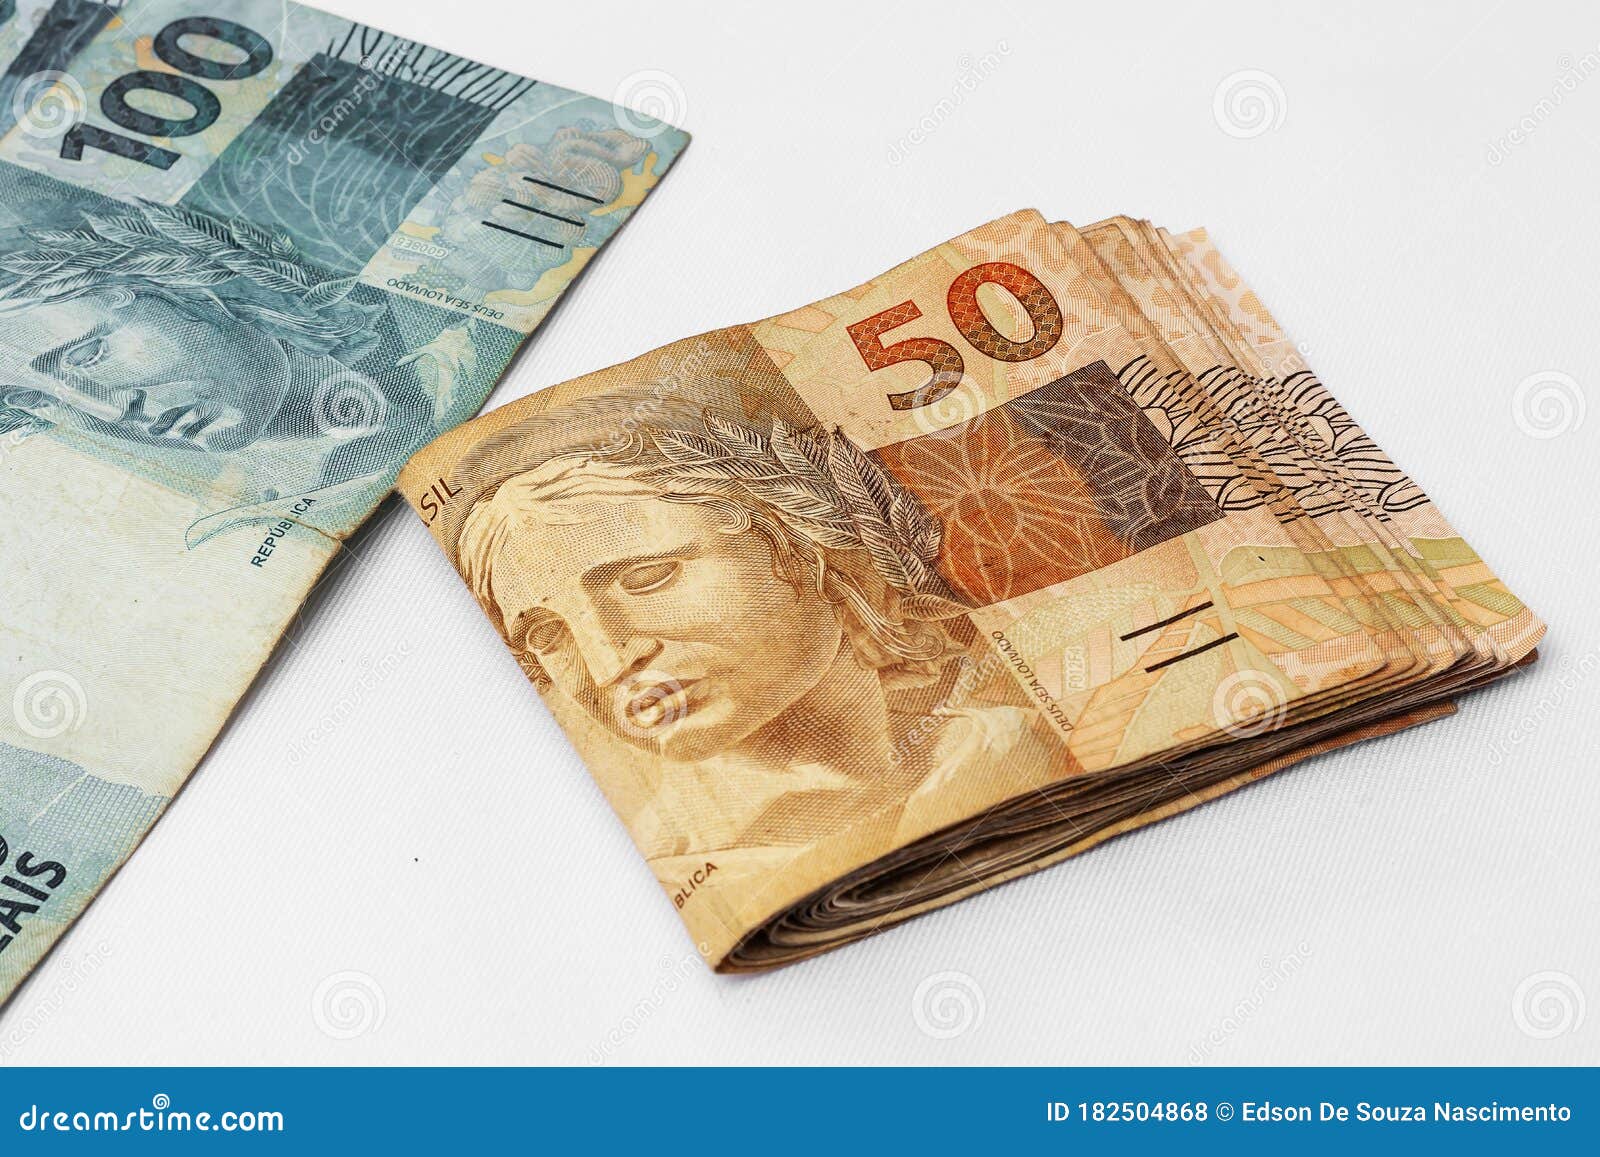 brazilian money scattered photographed on a white background